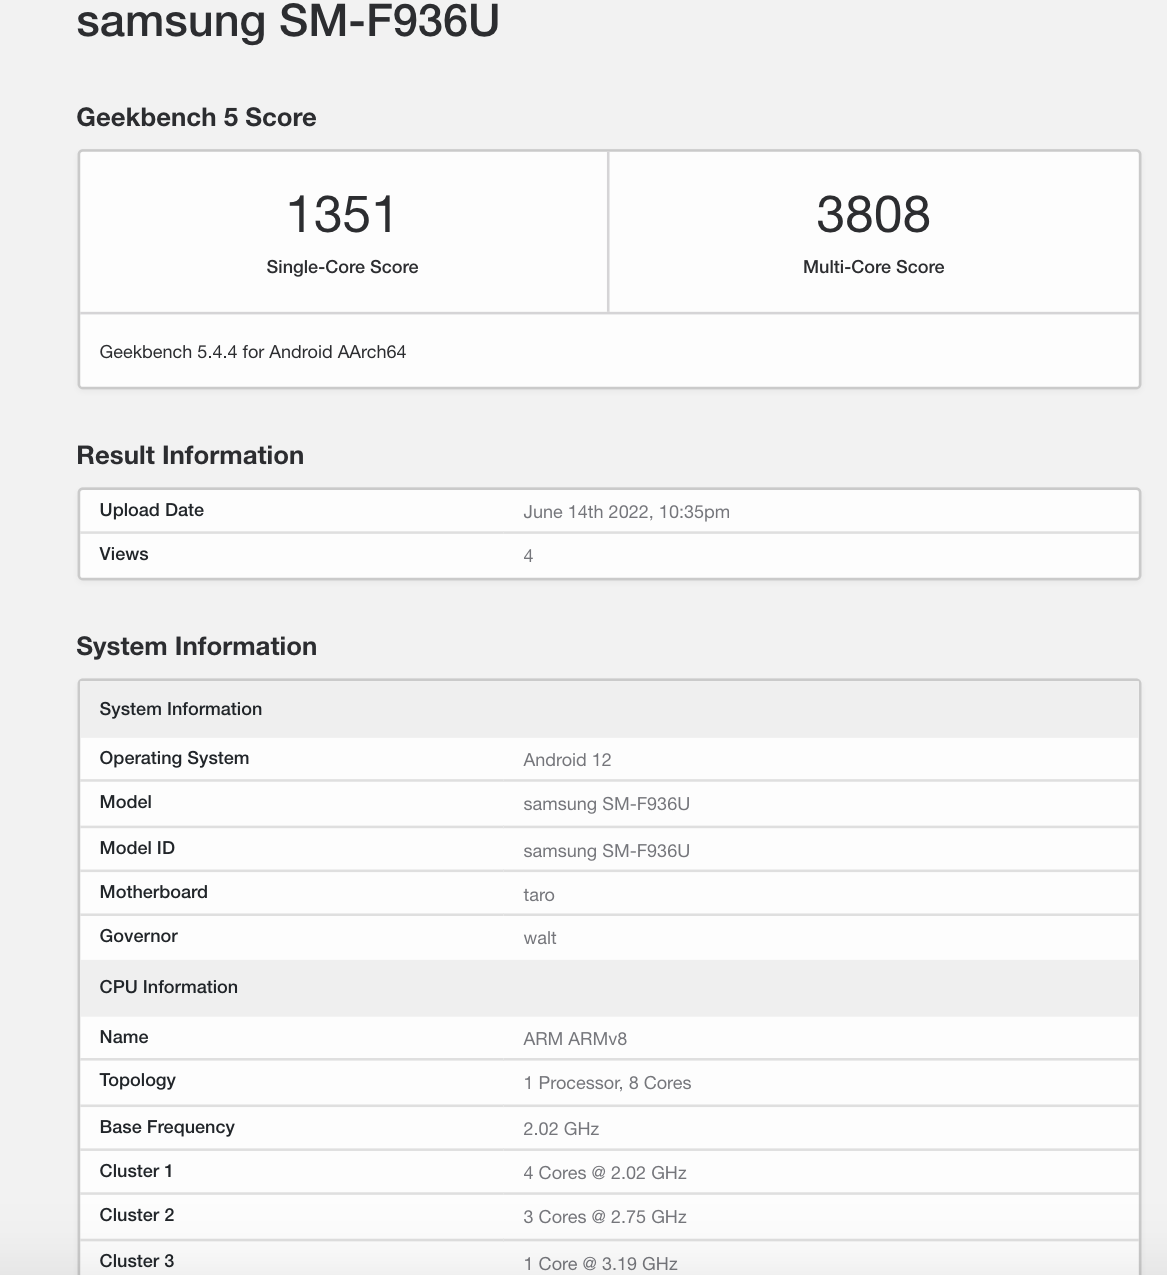 Galaxy Z Fold 4 benchmarked with Snapdragon 8+ Gen 1 chipset